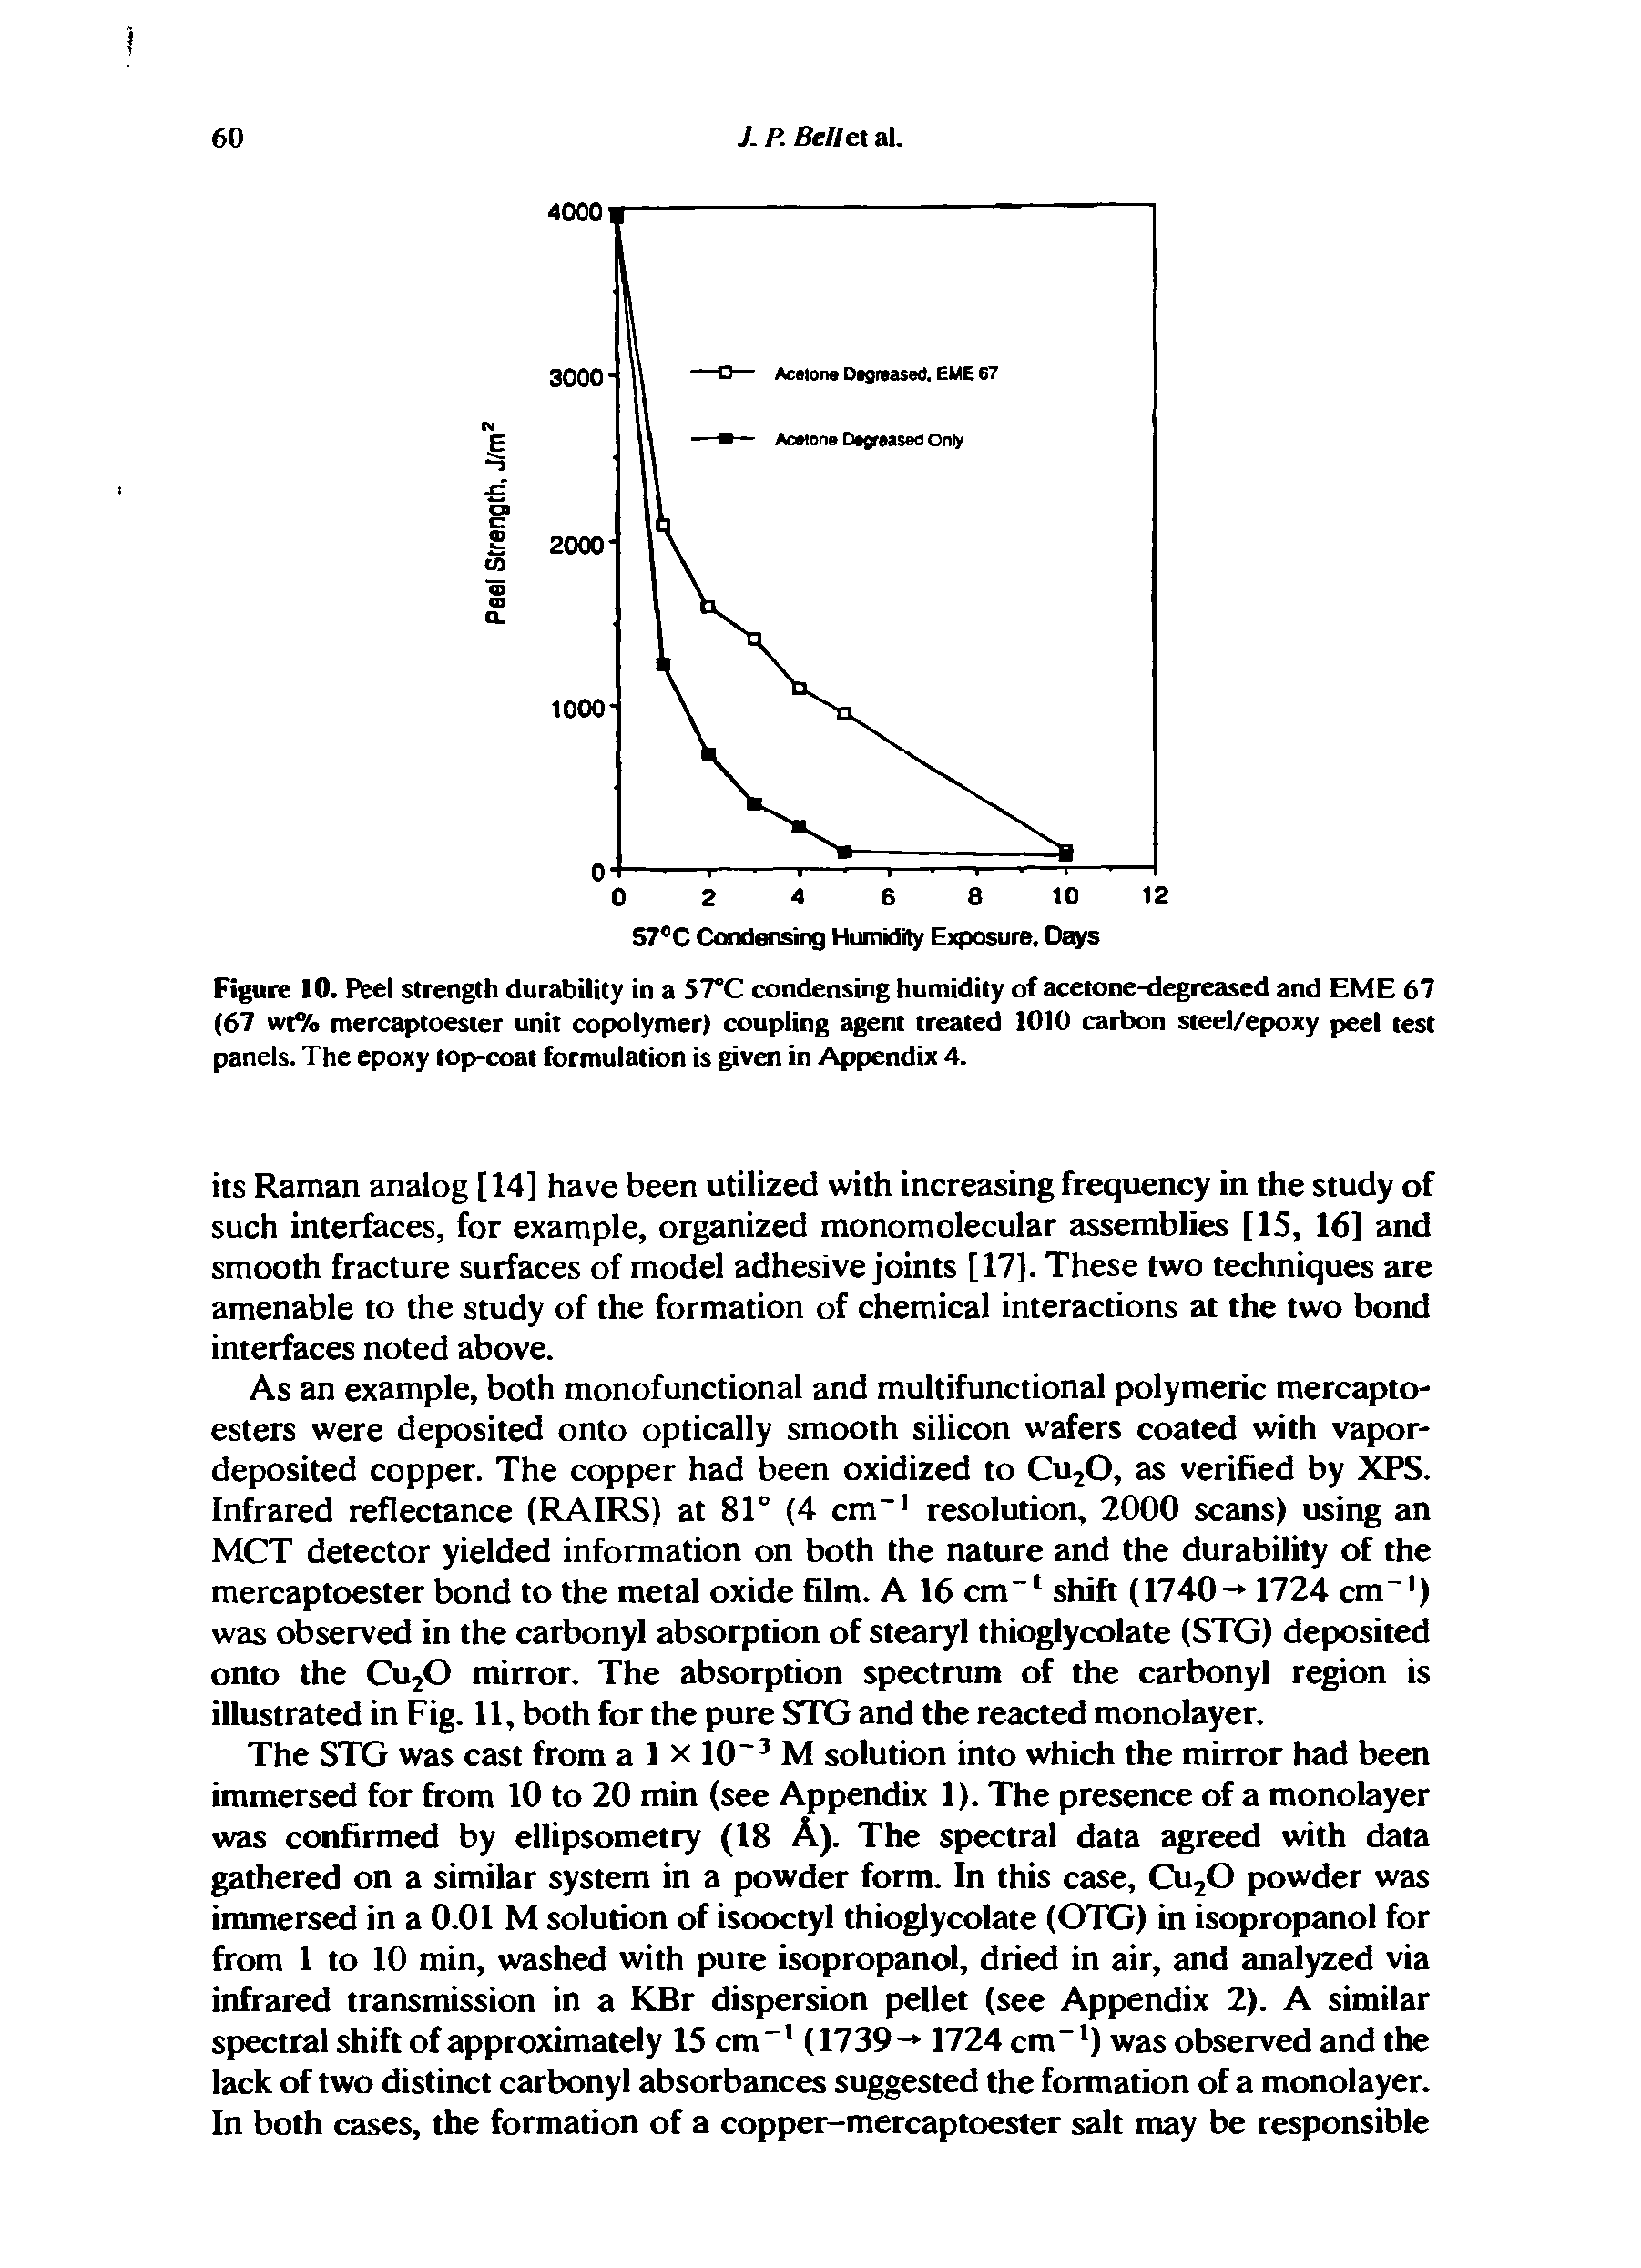 Figure 10. Peel strength durability in a 5TC condensing humidity of acetone-degreased and EME 67 (67 wt% mercaptoester unit copolymer) coupling agent treated 1010 carbon steel/epoxy peel test panels. The epoxy top-coat formulation is given in Appendix 4.